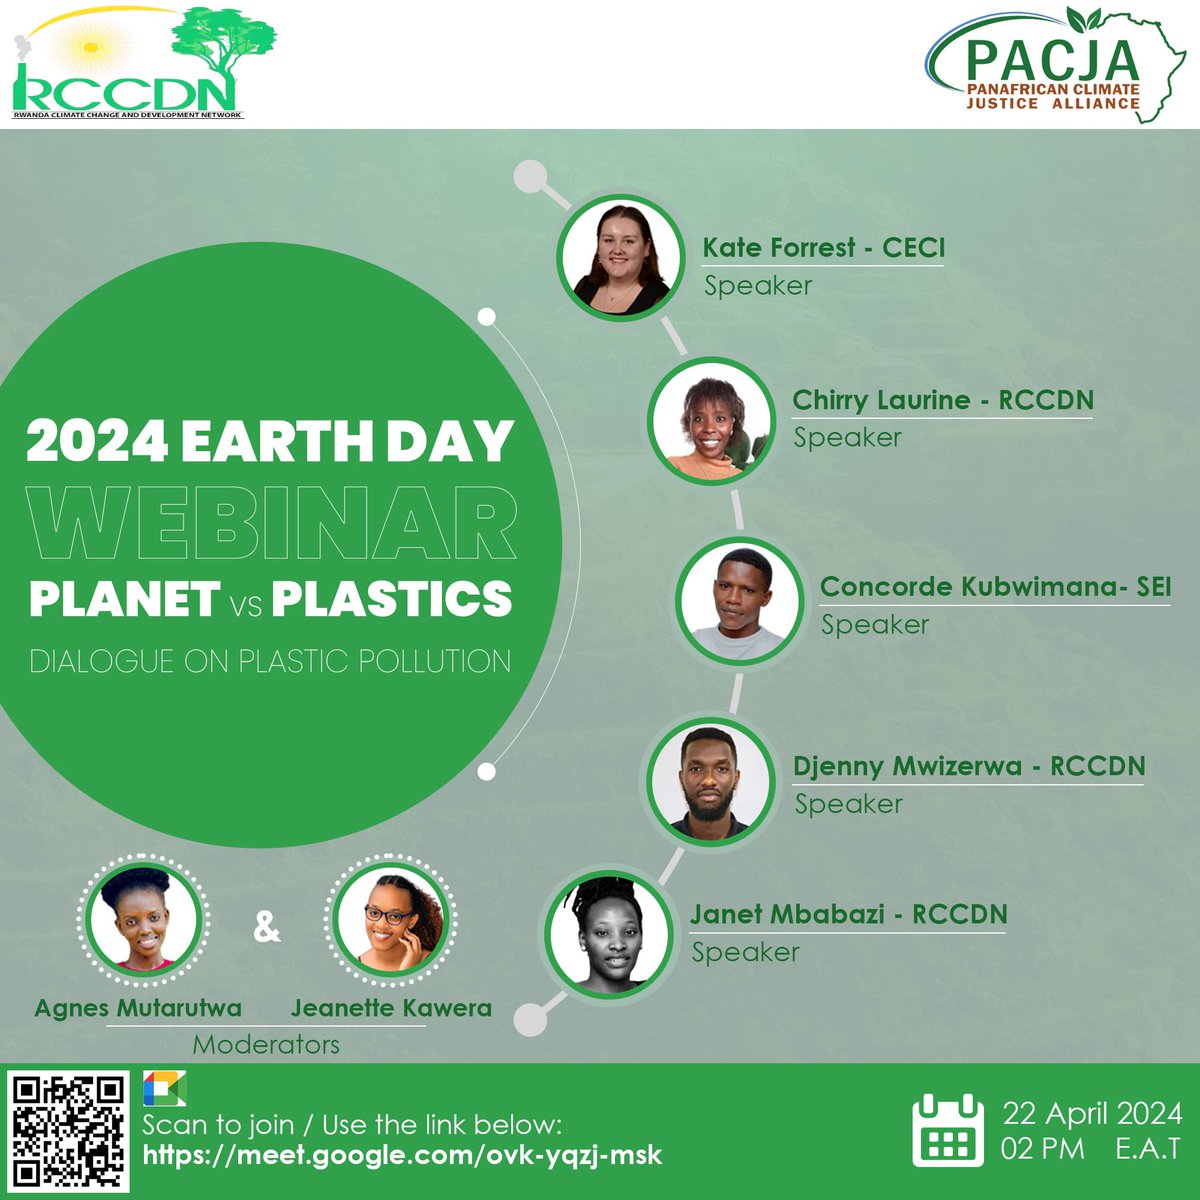 « Join us in the fight against plastic pollution! Our virtual meeting today , themed ´planet vs plastic ´, will unite stakeholders and concerned individuals to address the crisis of plastic pollution. #PlanetvsPlastics #Sustainability #everyactioncounts #EarthDay2024 @PACJA1